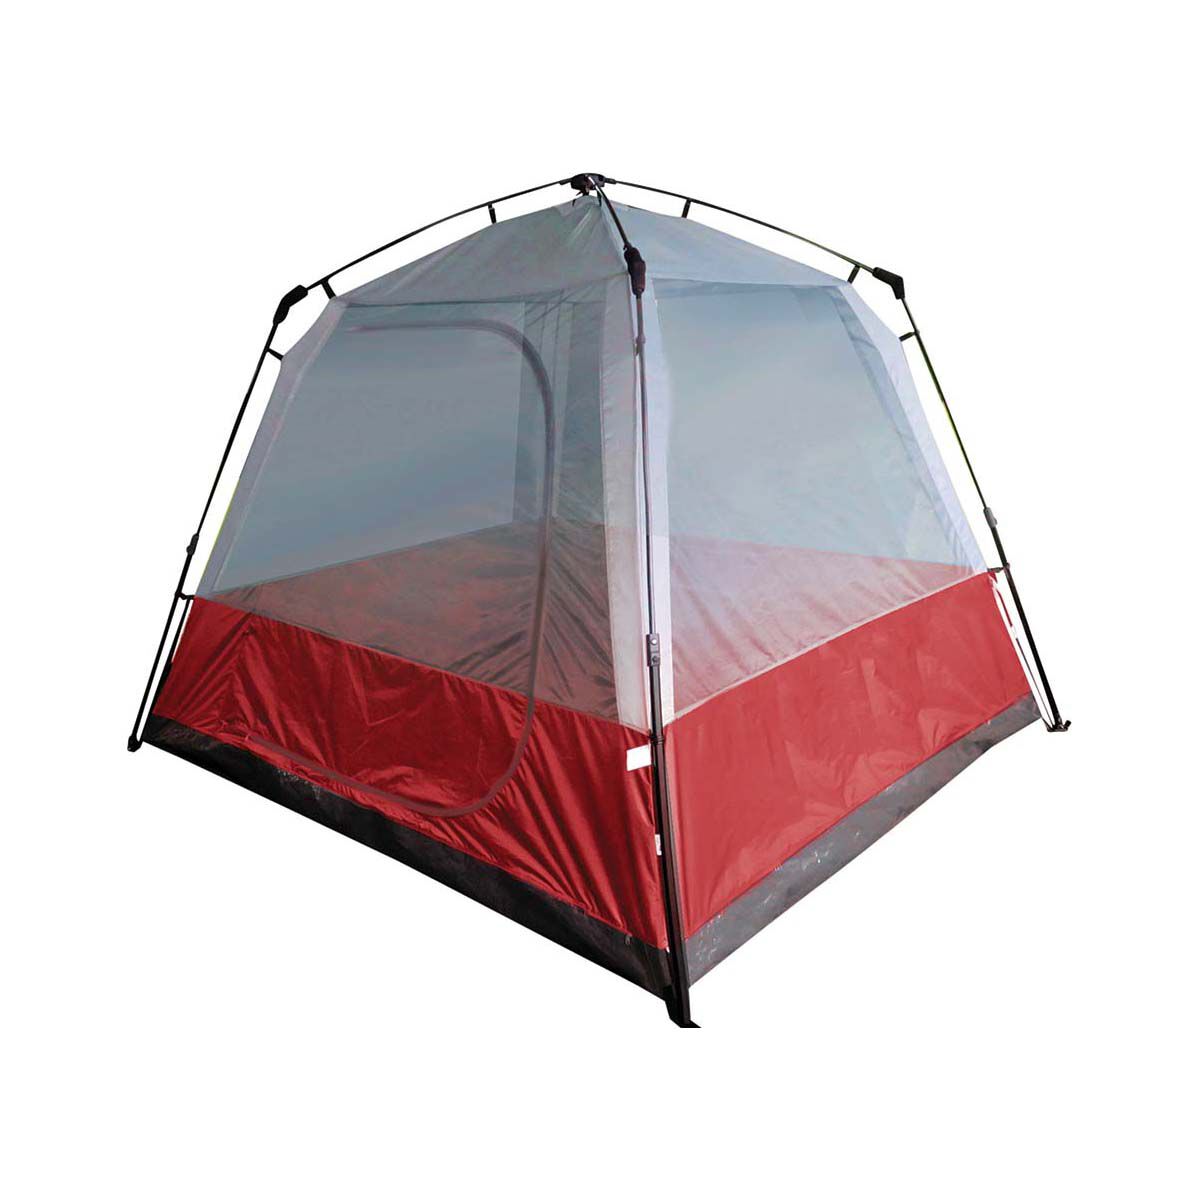 Wanderer Criterion 4 Person Instant Tent